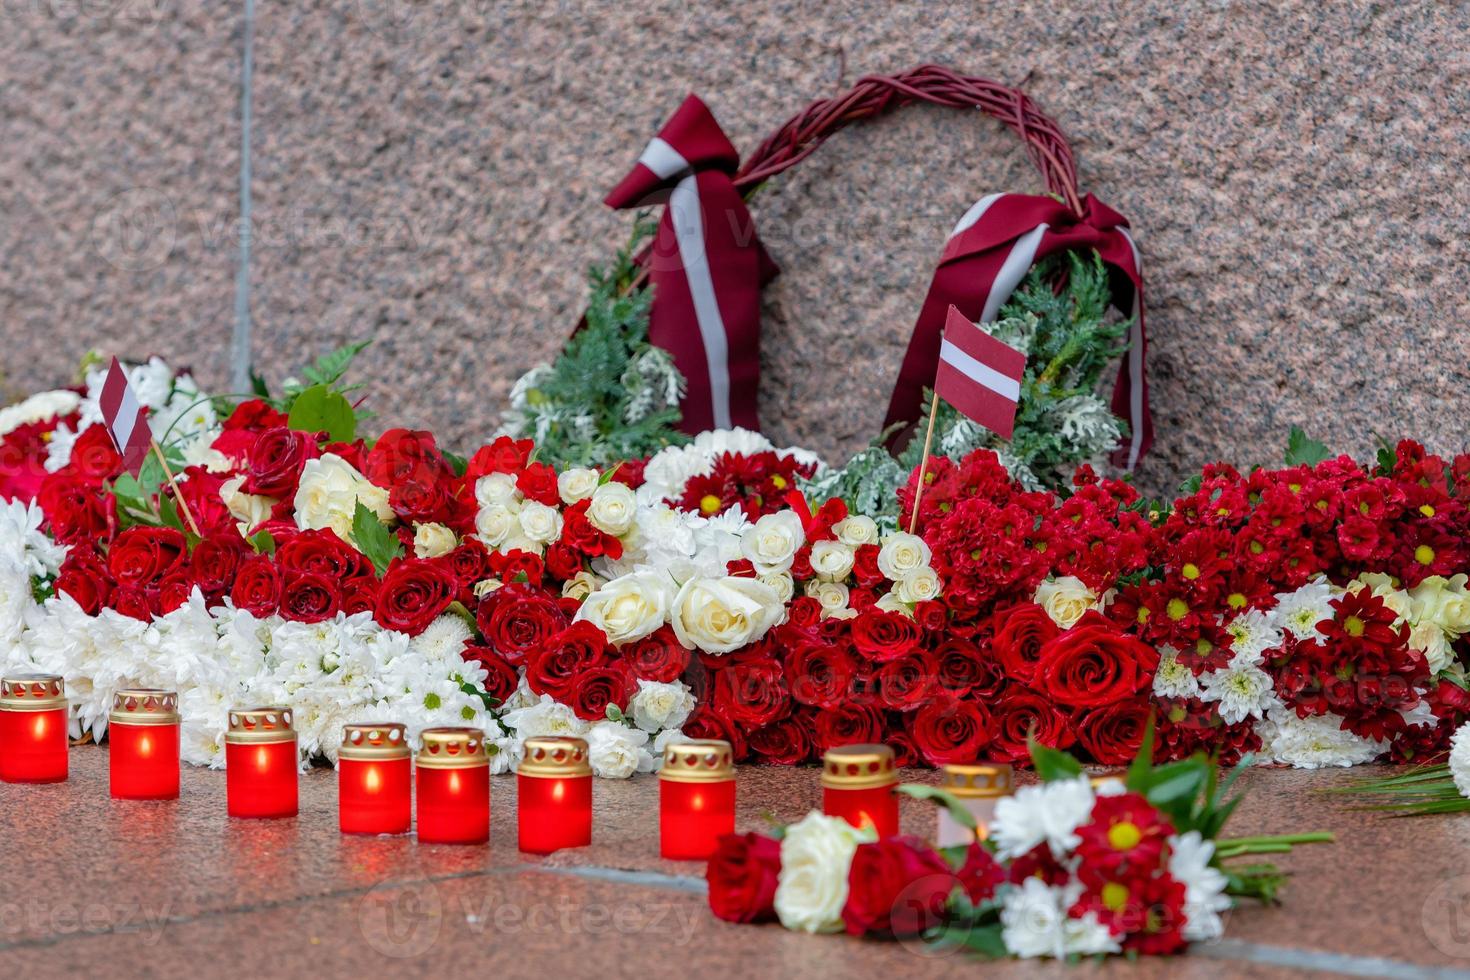 Latvia 100 years. Red and white flowers compositions at the Freedom Monument in city Riga, Latvia photo